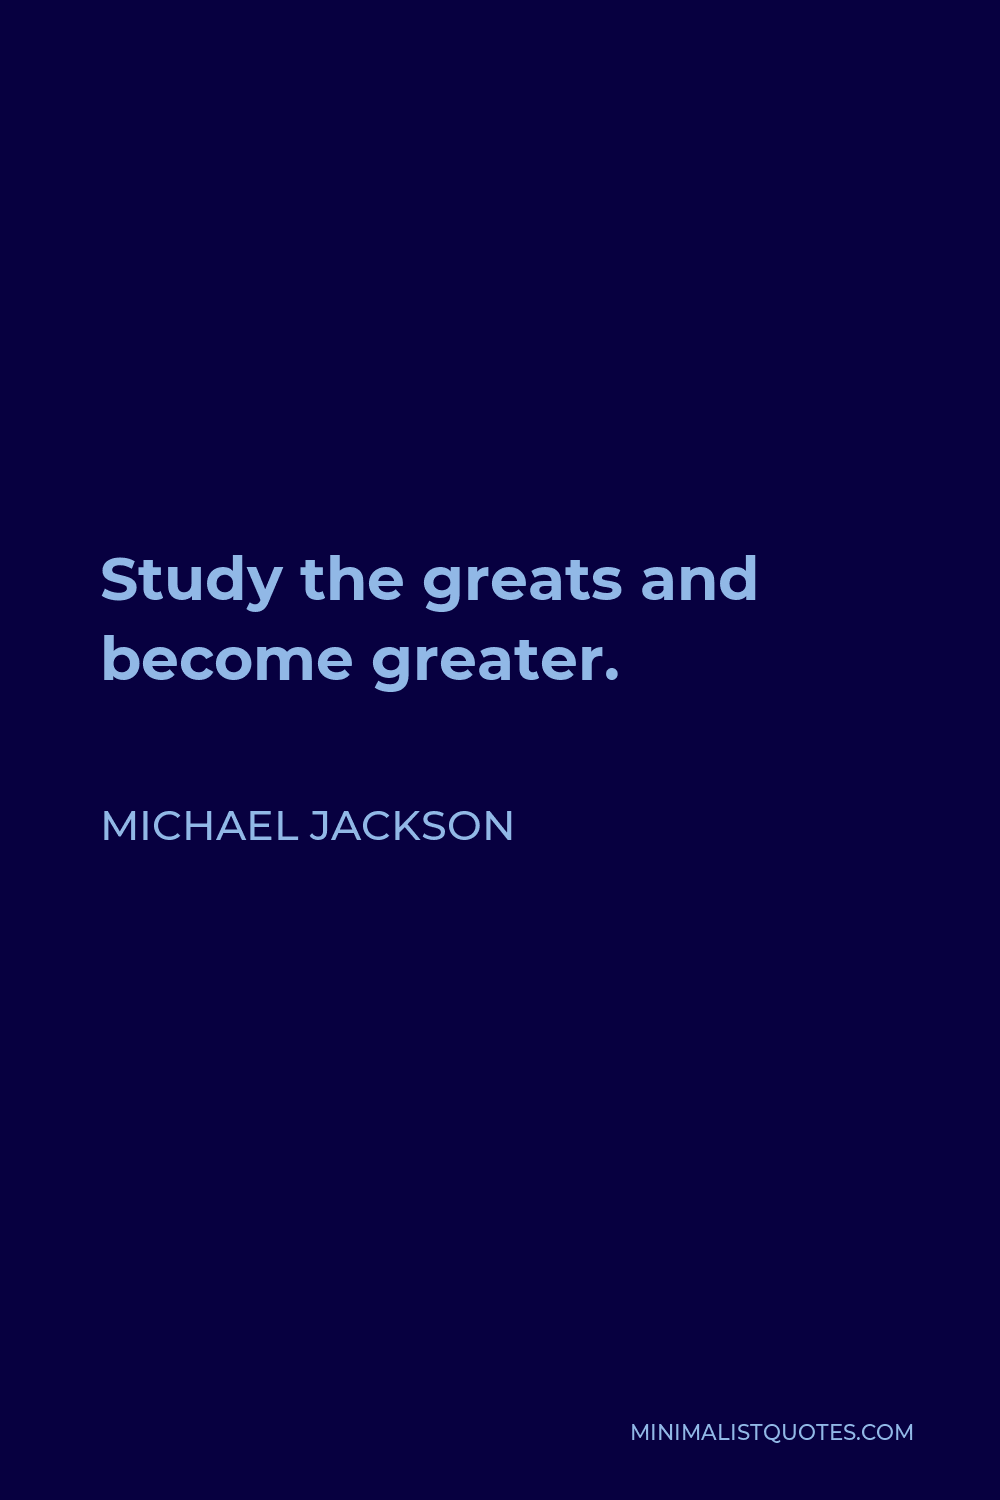 Michael Jackson Quote - Study the greats and become greater.